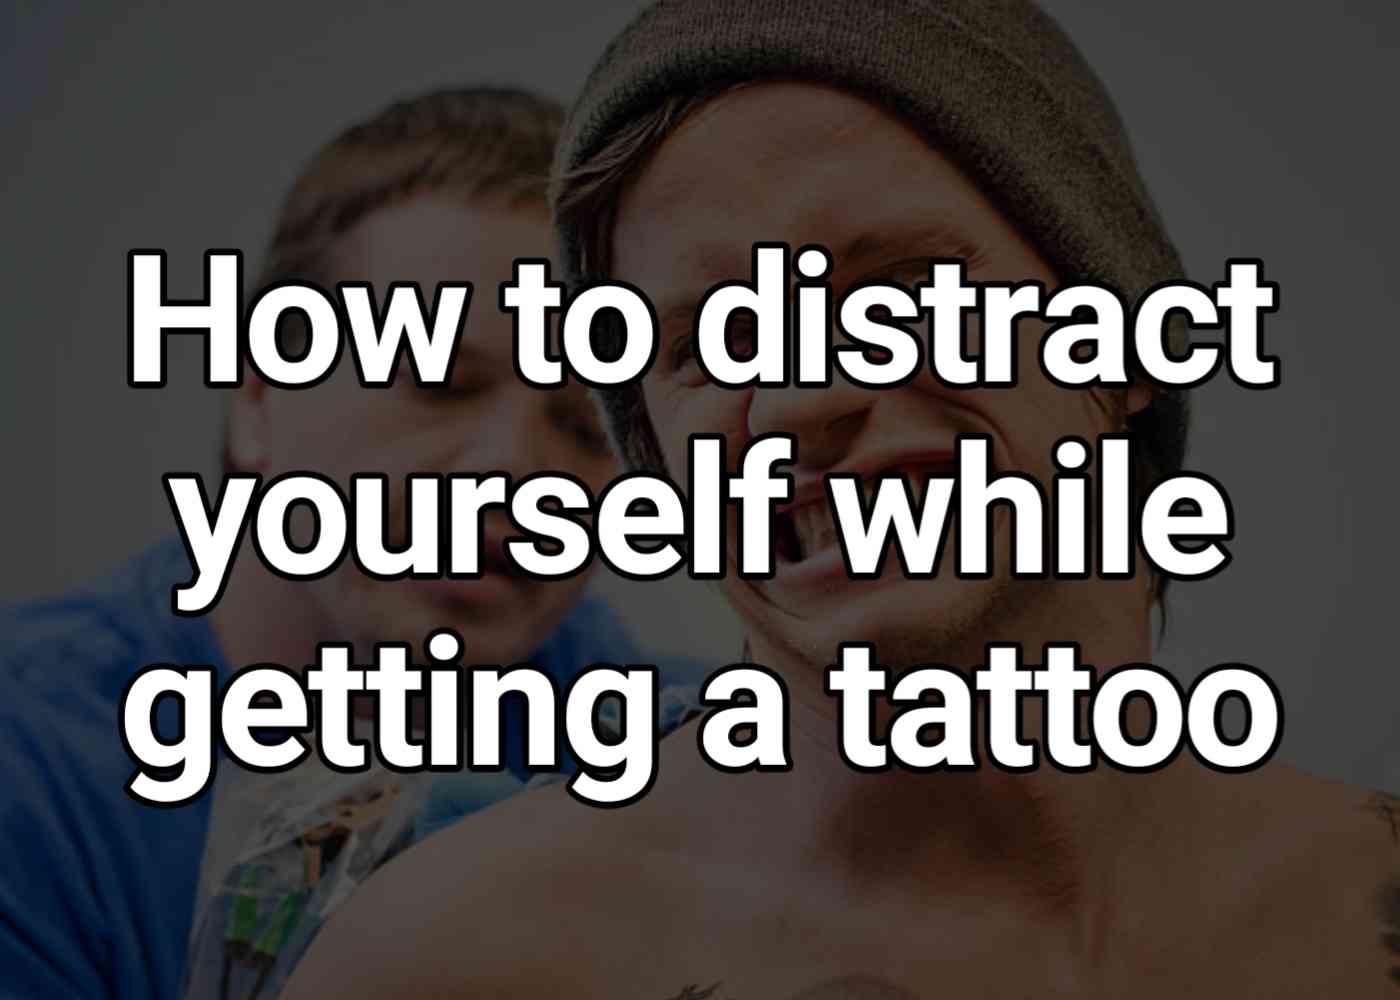 How to distract yourself while getting a tattoo